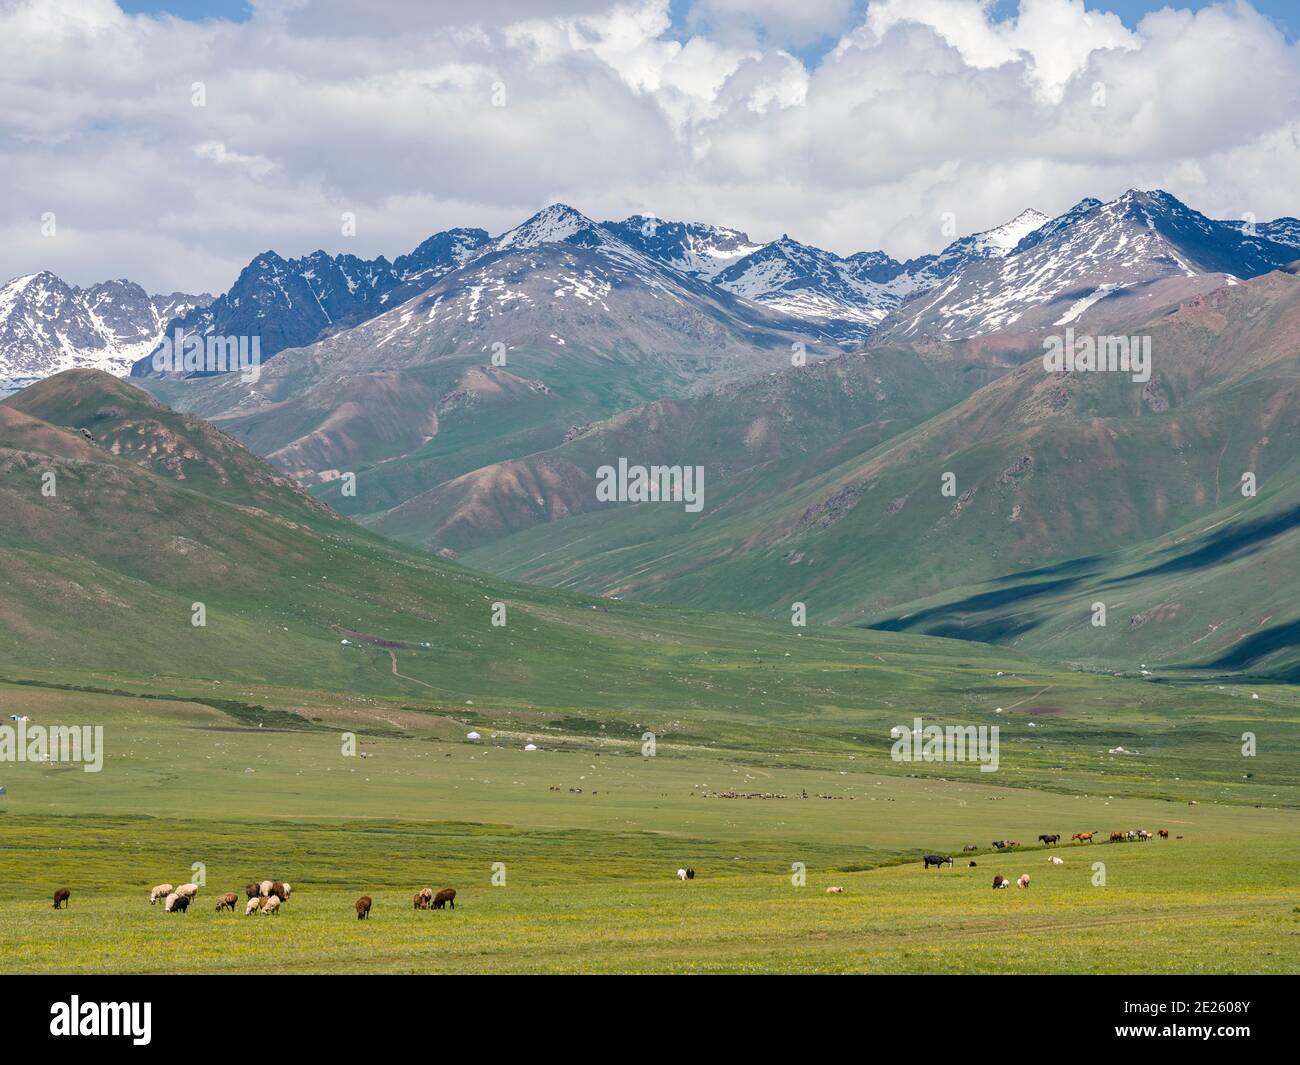 Summer pasture with traditional Jurts. The Suusamyr plain, a high valley in Tien Shan Mountains.  Asia, central Asia, Kyrgyzstan Stock Photo